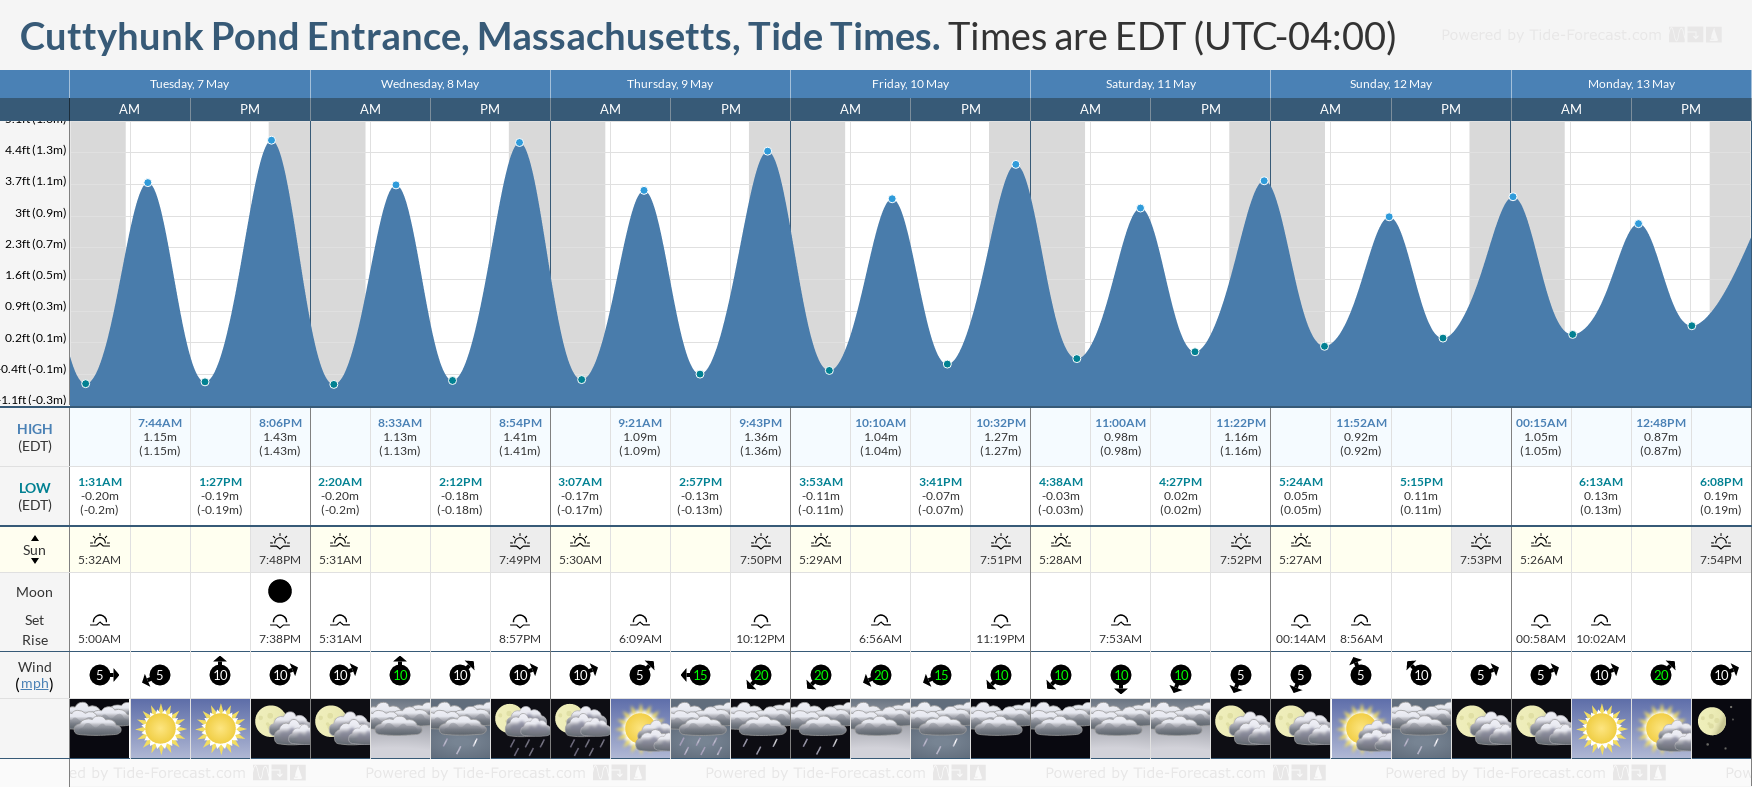 Cuttyhunk Pond Entrance, Massachusetts Tide Chart including high and low tide tide times for the next 7 days